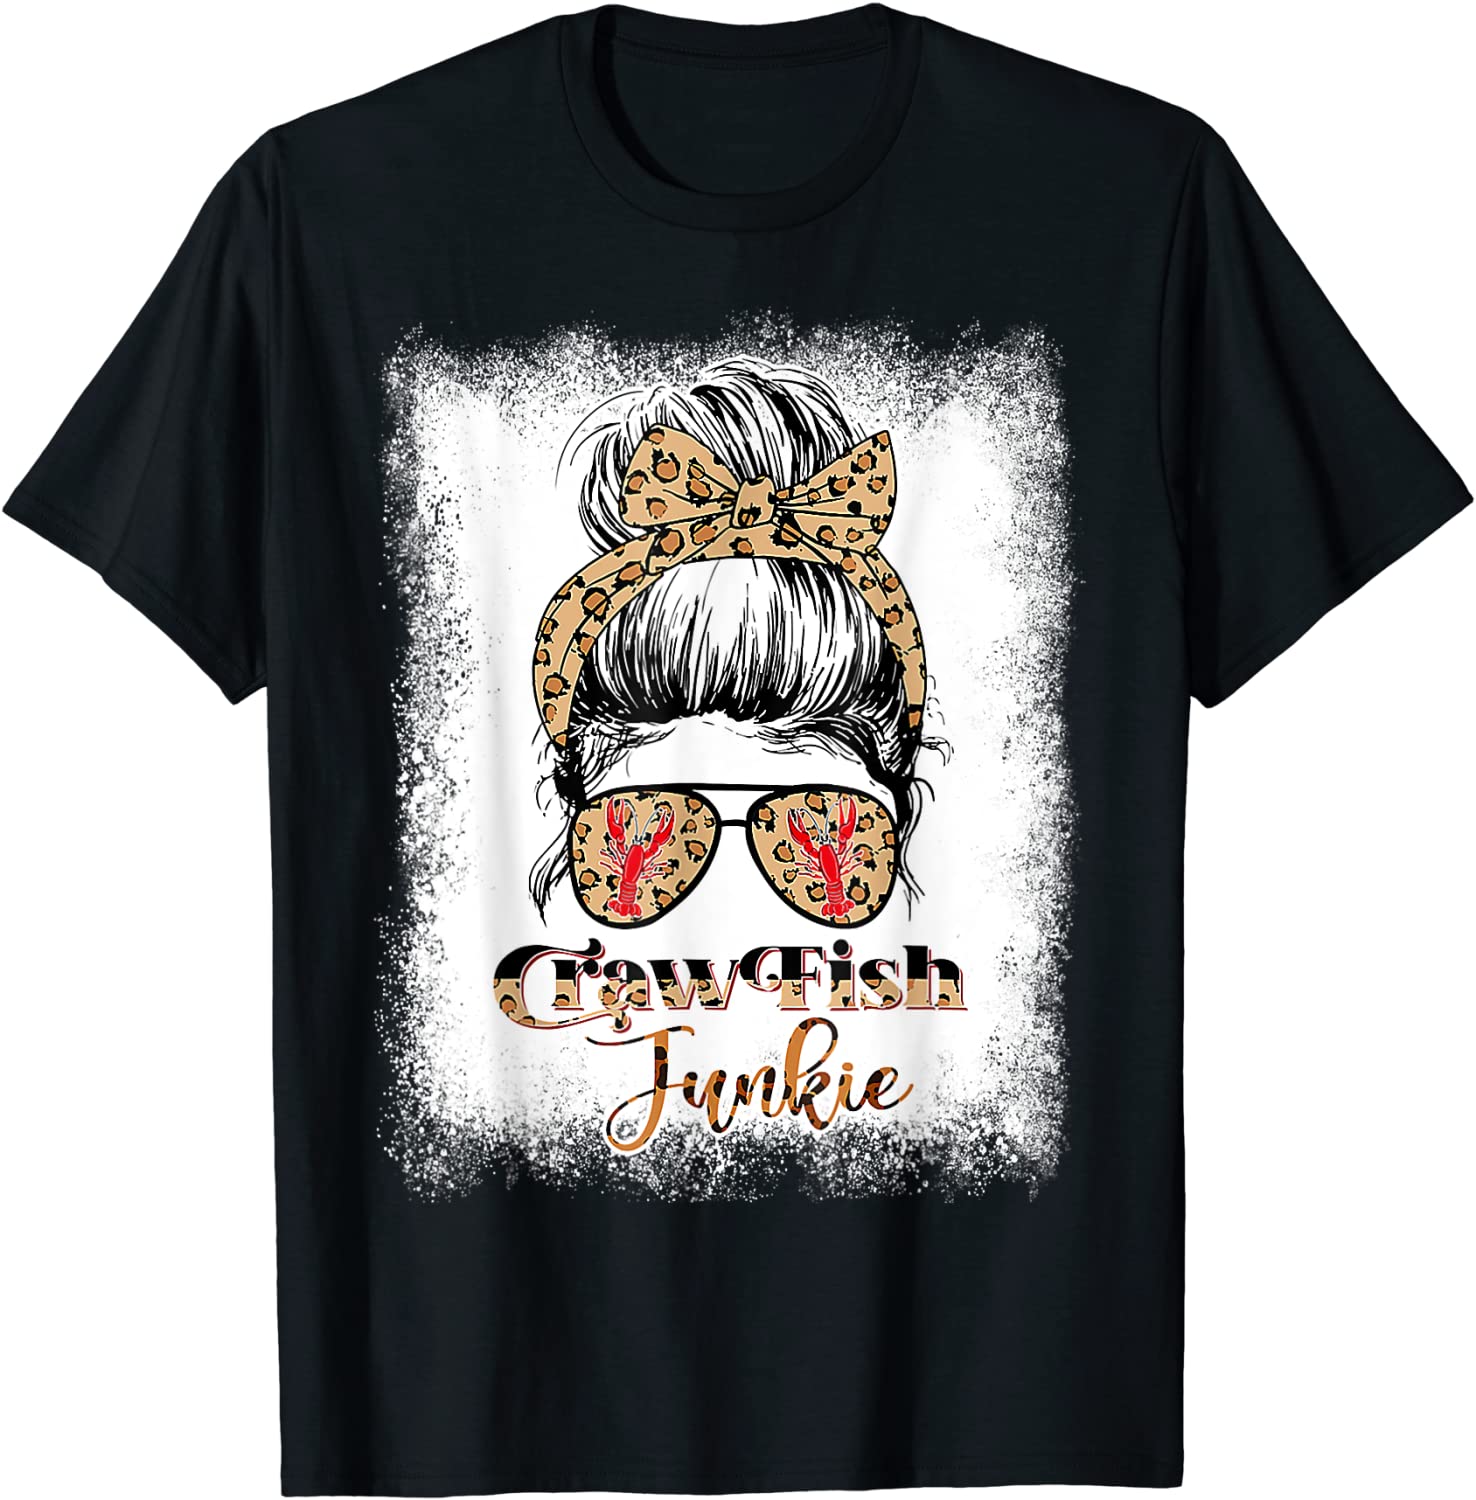 Bleached Crawfish Junkie Leopard Messy Bun With Sunglasses Tee Shirt ...